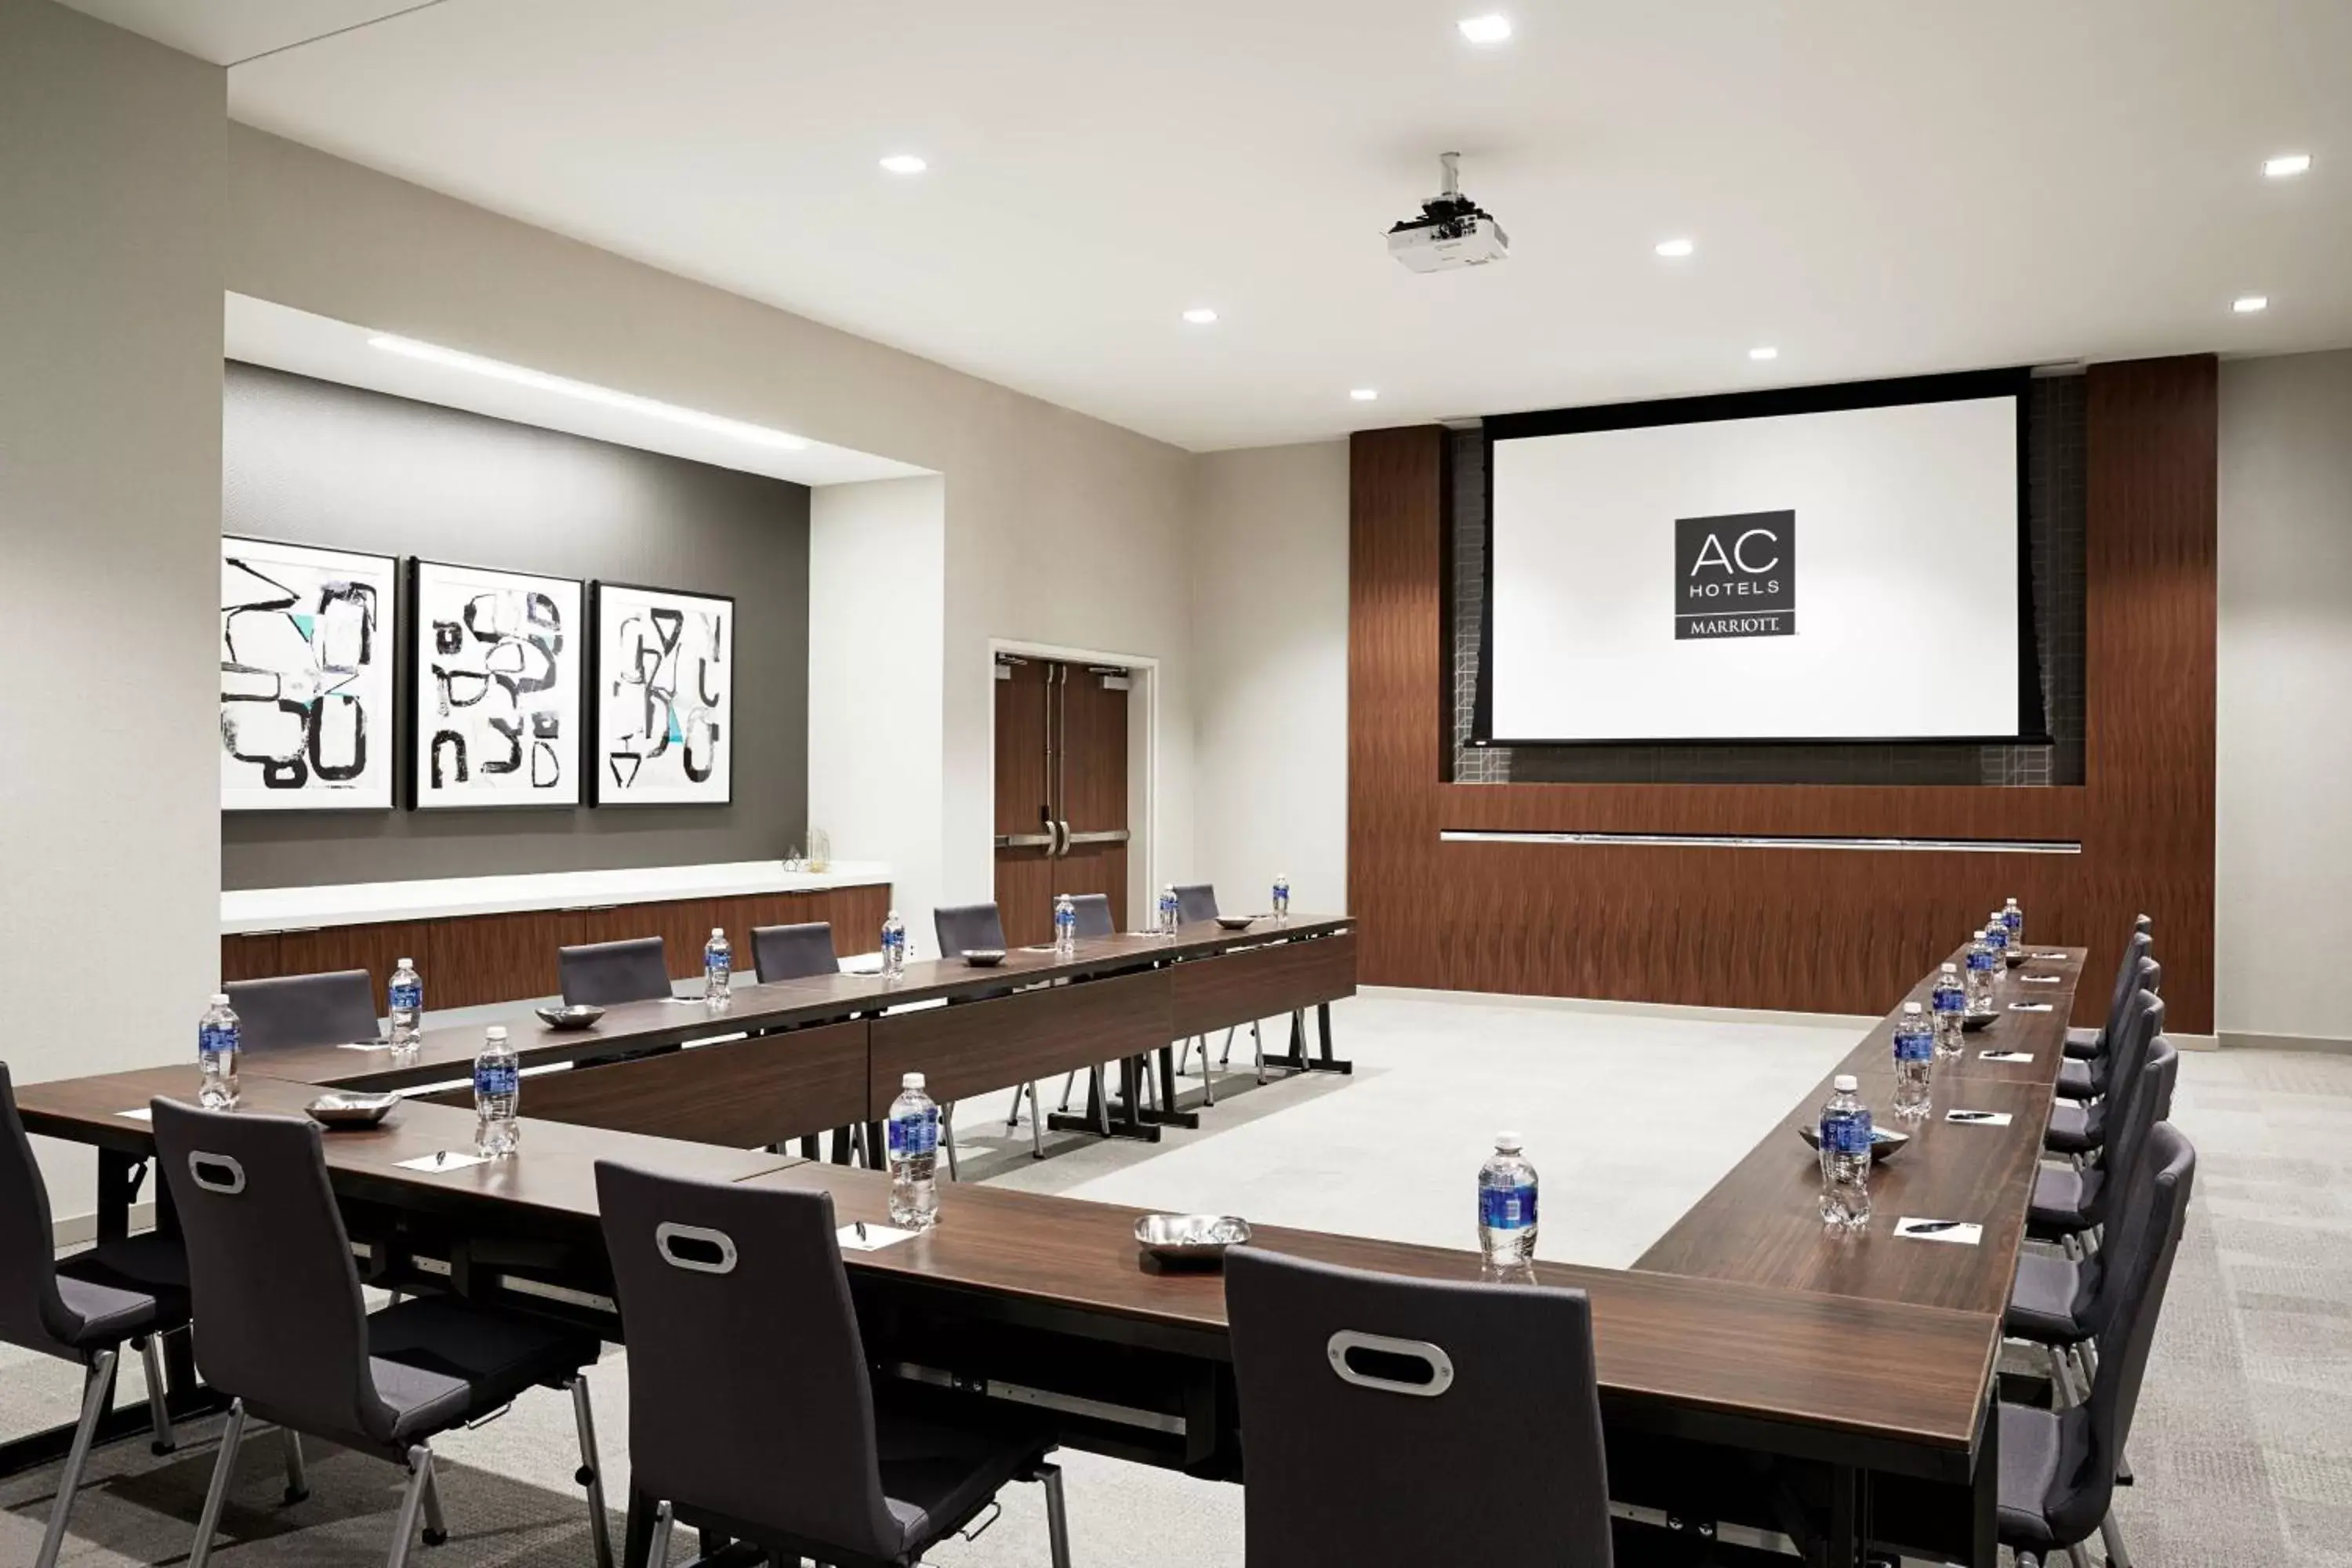 Meeting/conference room in AC Hotel by Marriott Raleigh North Hills